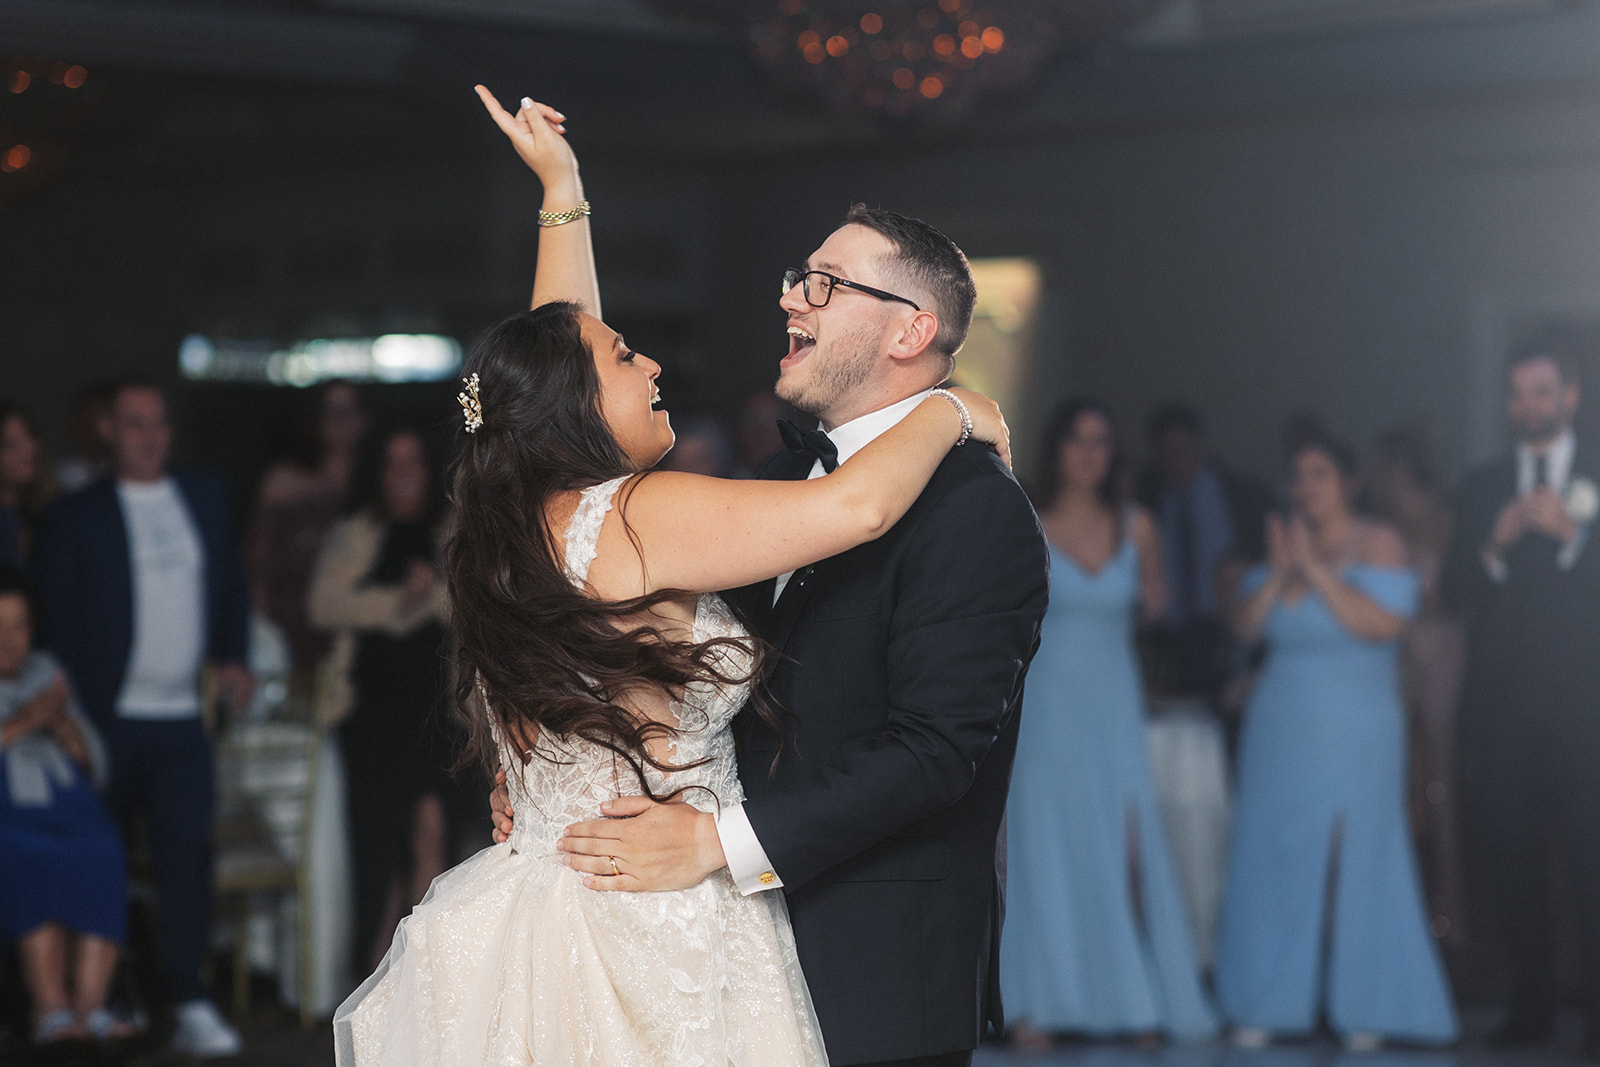 Newlyweds dance alone on the dance floor surrounded by guests and singing